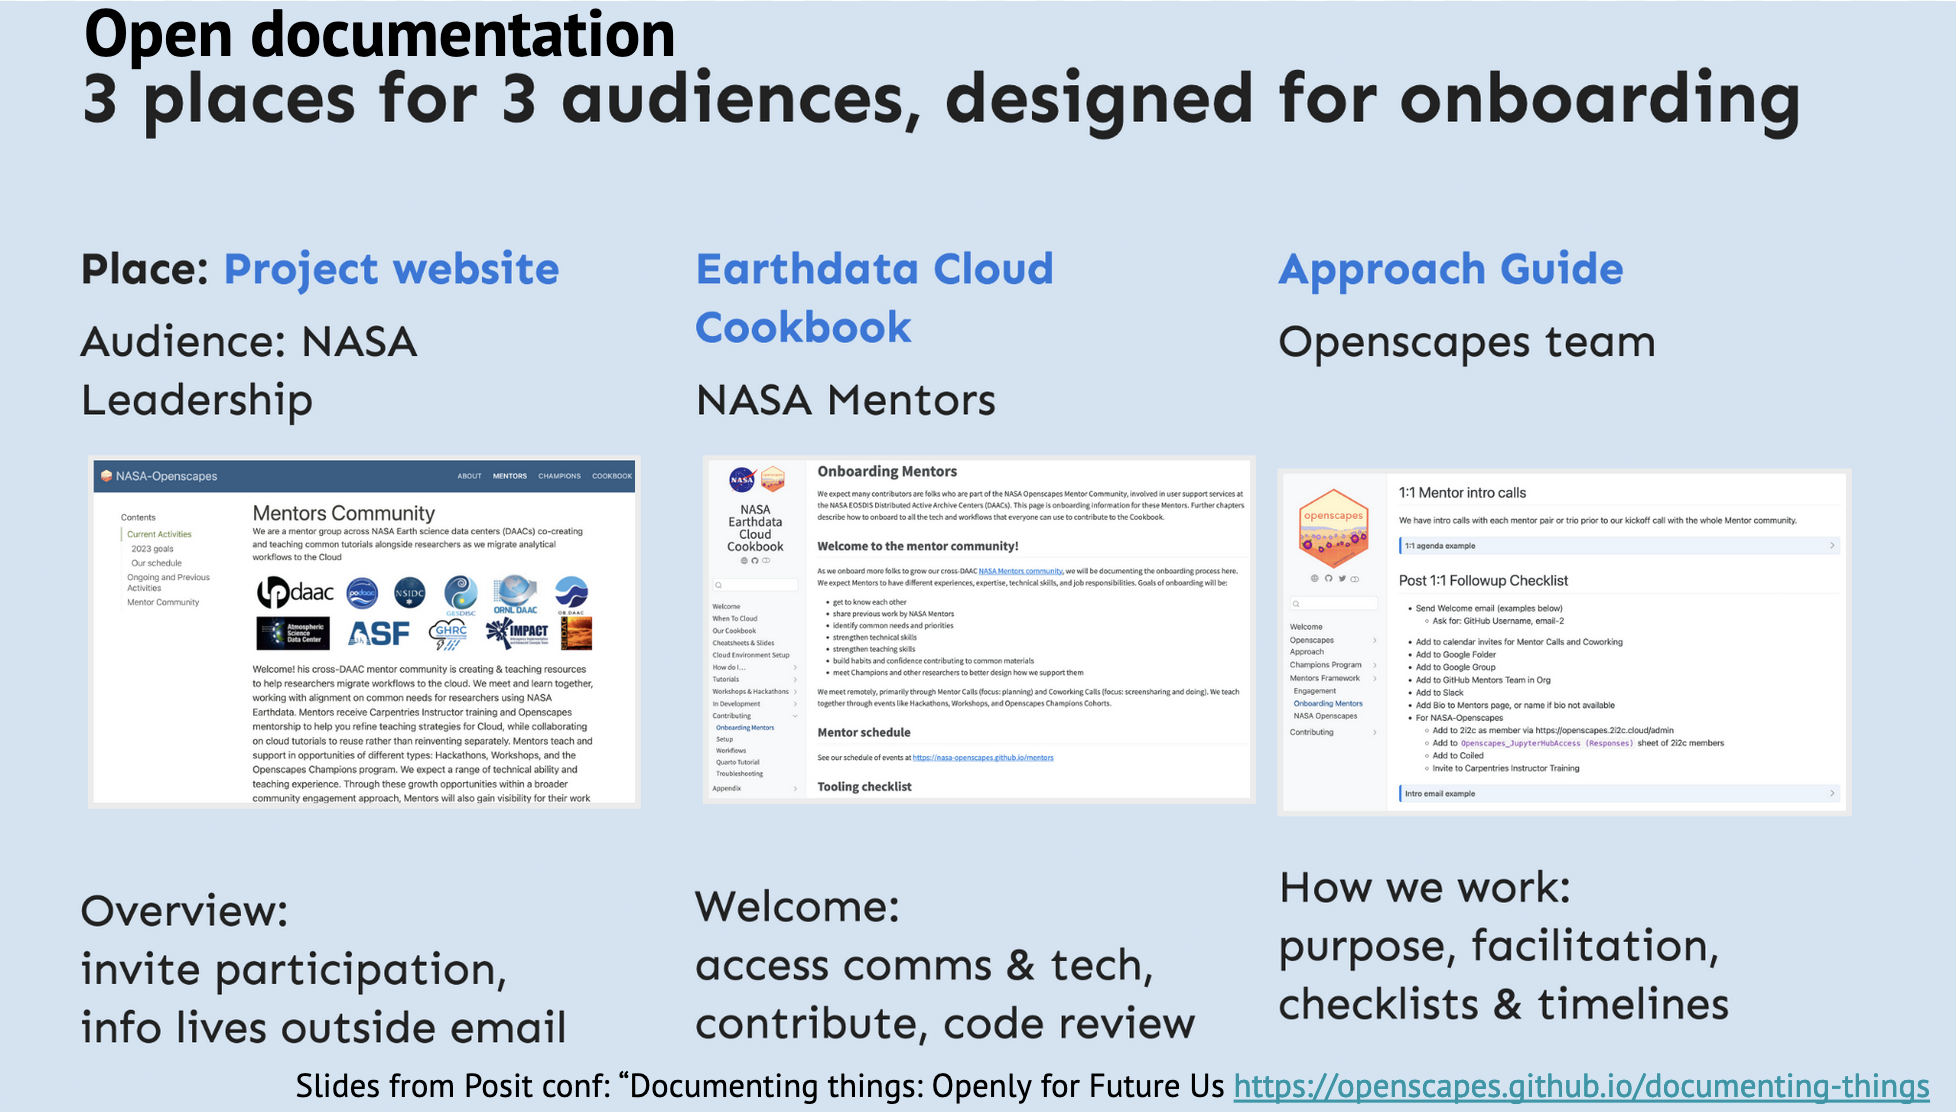 image of three onboarding books with different audiences